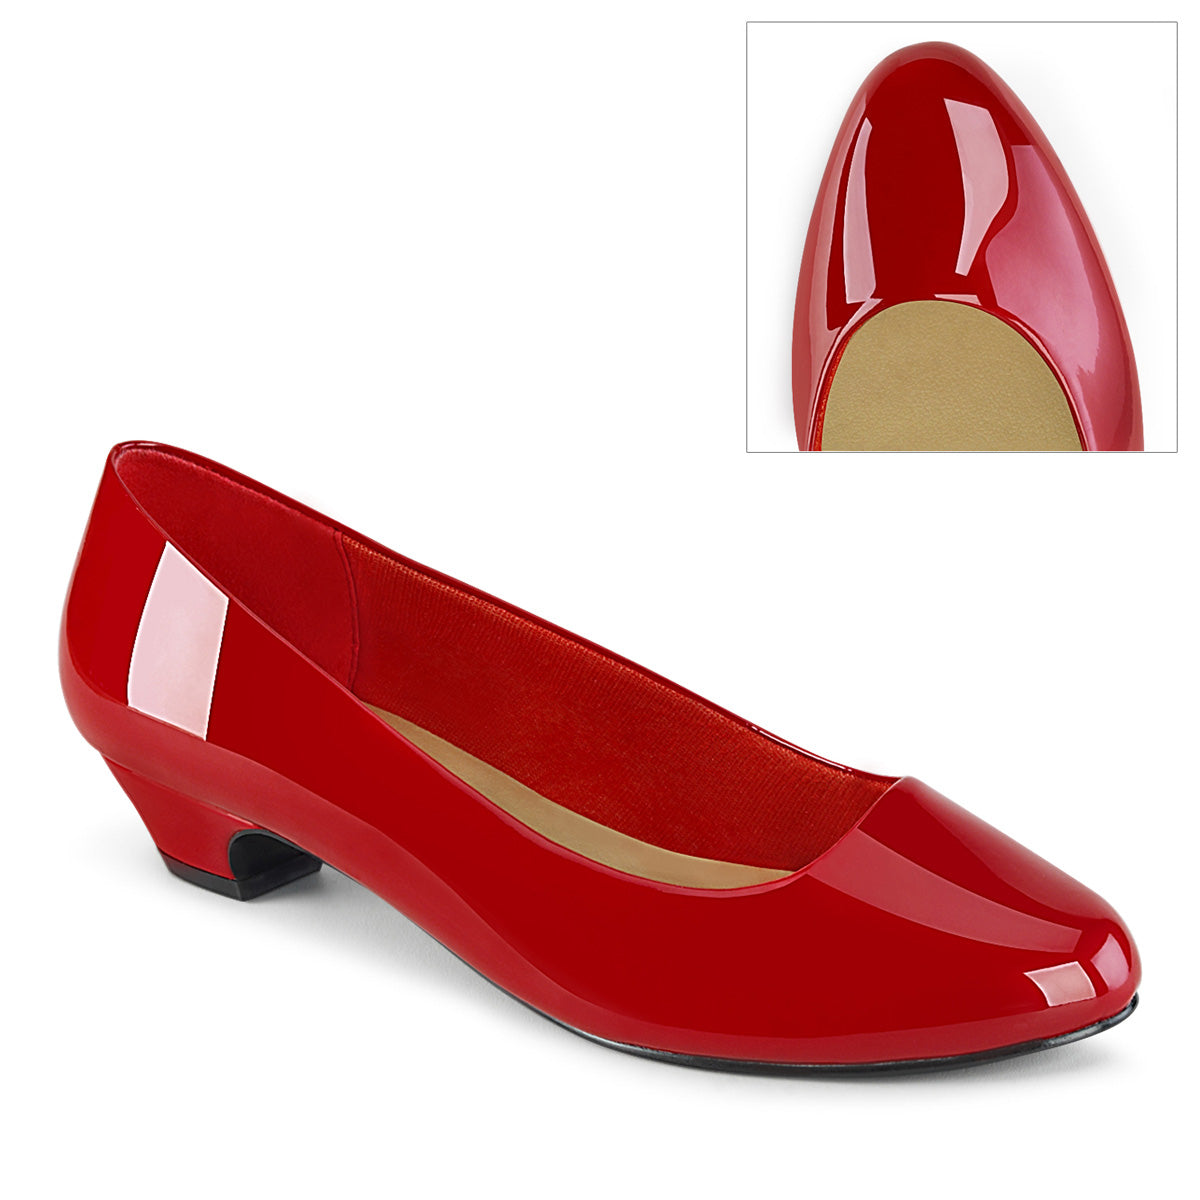 GWEN-01 Pleaser Large Size Ladies Shoes 1.5 Inch Heel Red Sexy Shoes